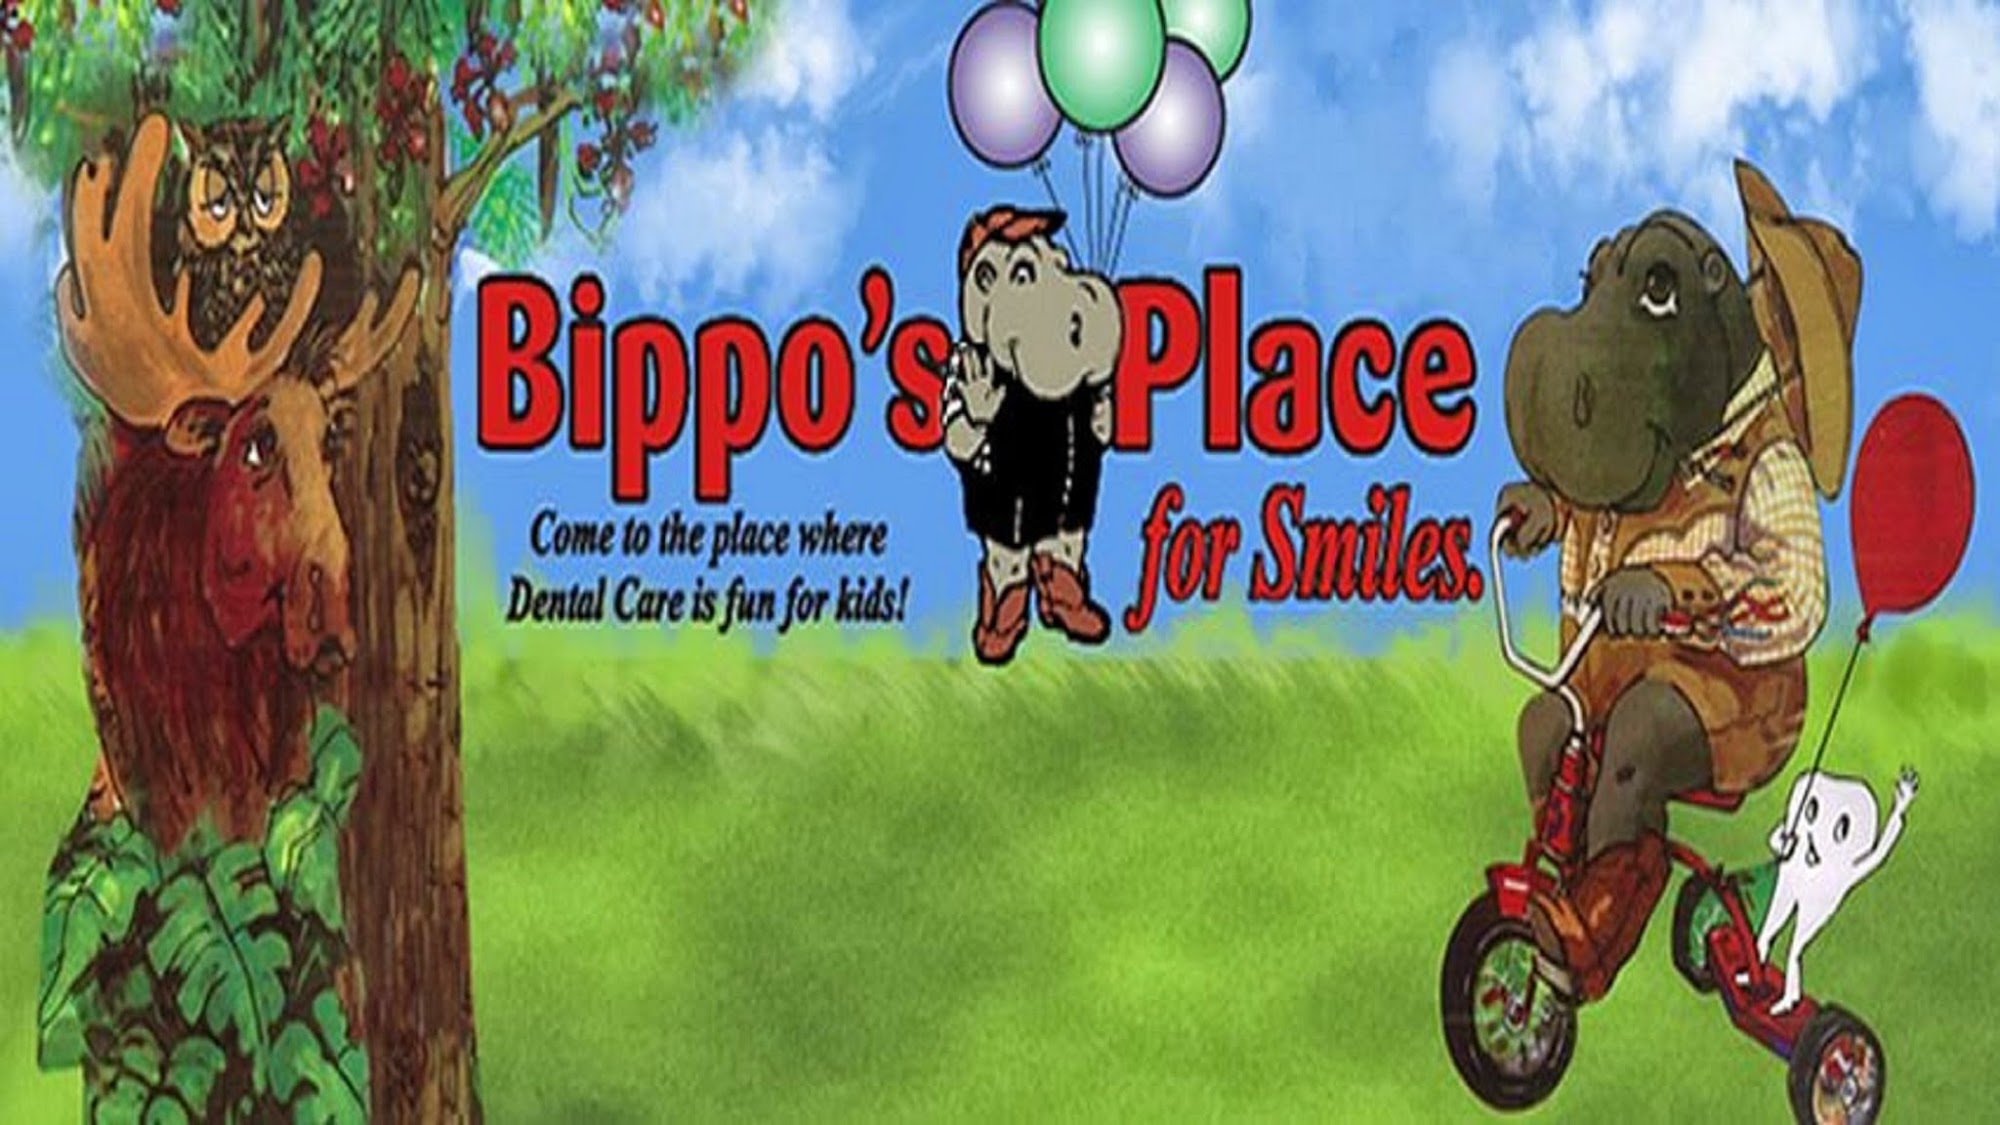 Bippo's Place For Smiles